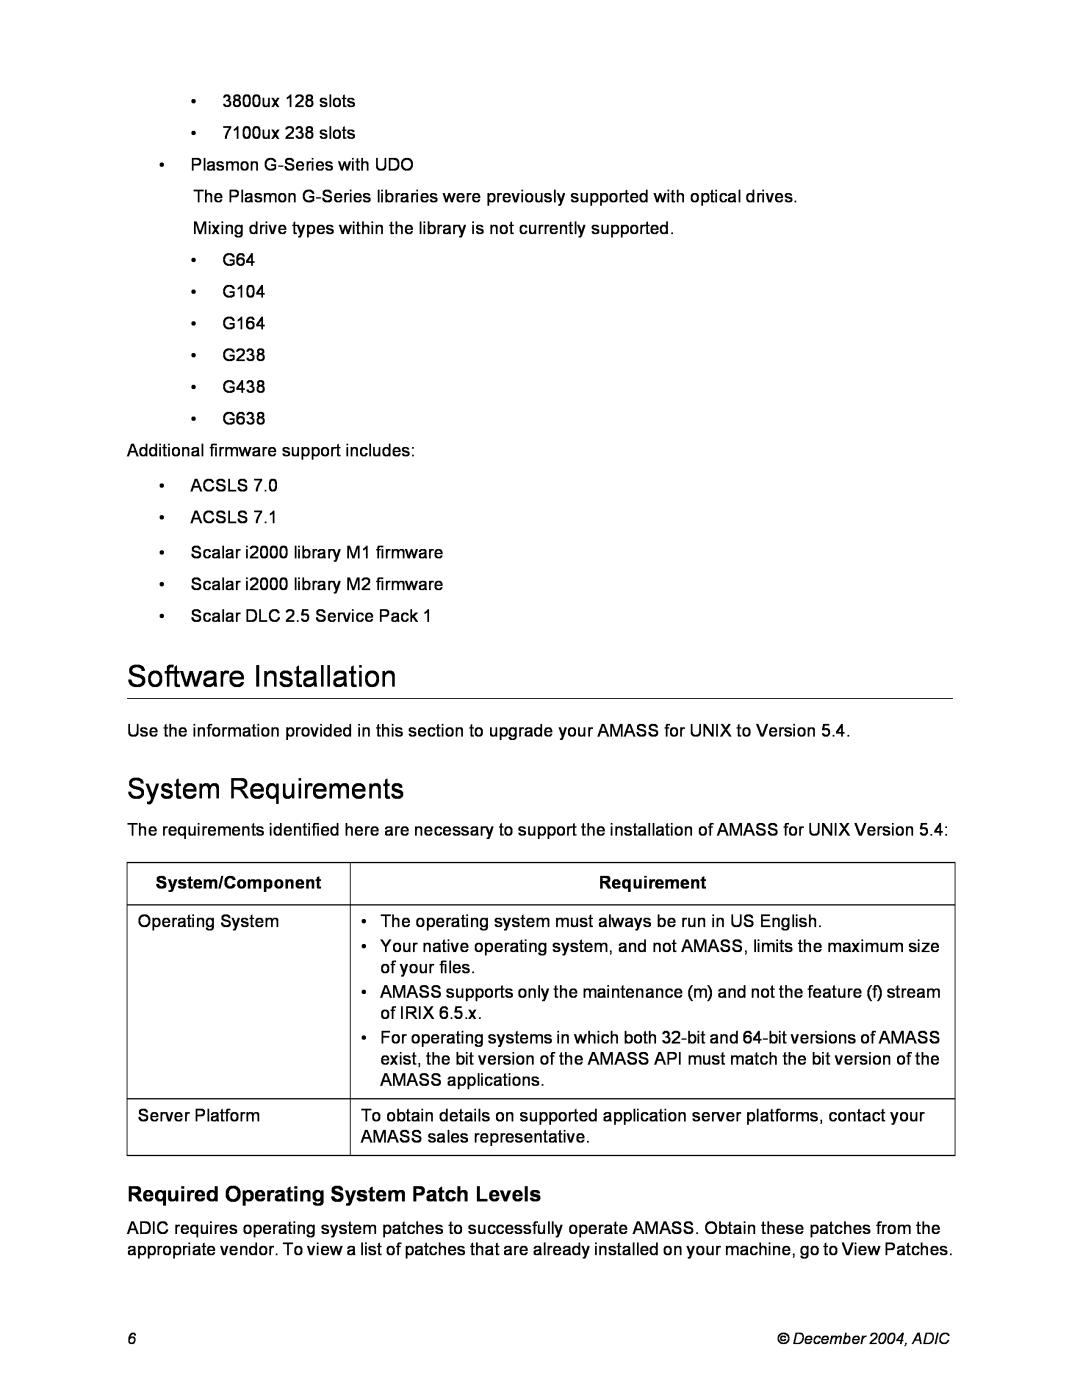 ADIC 5.4 manual Software Installation, System Requirements, Required Operating System Patch Levels, System/Component 